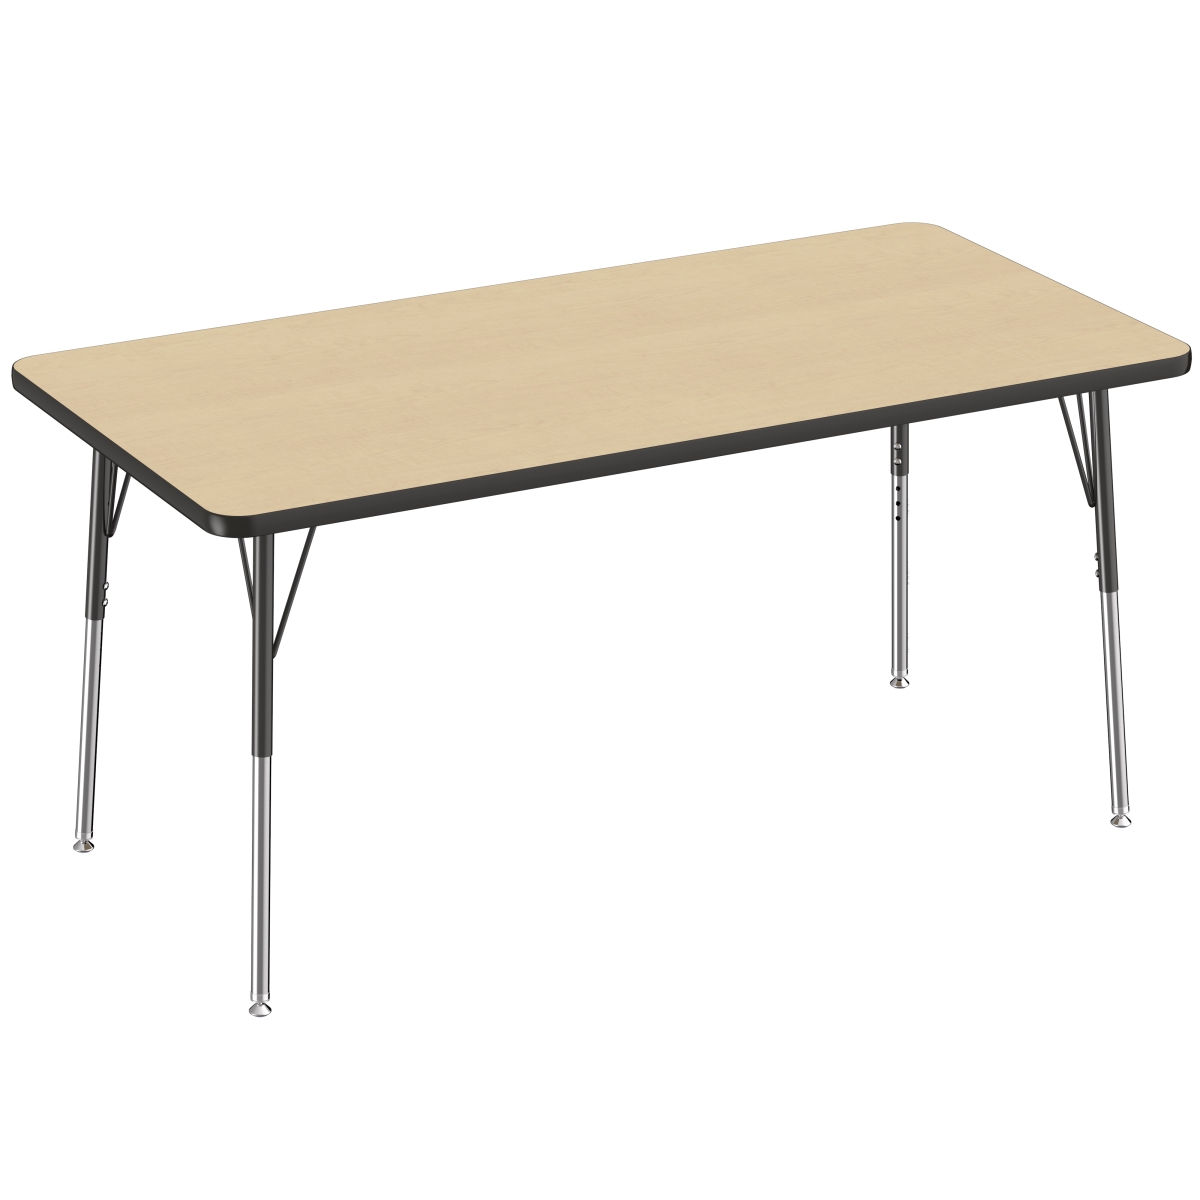 10023-mpbk 30 X 60 In. Rectangle T-mold Adjustable Activity Table With Standard Swivel - Maple & Black